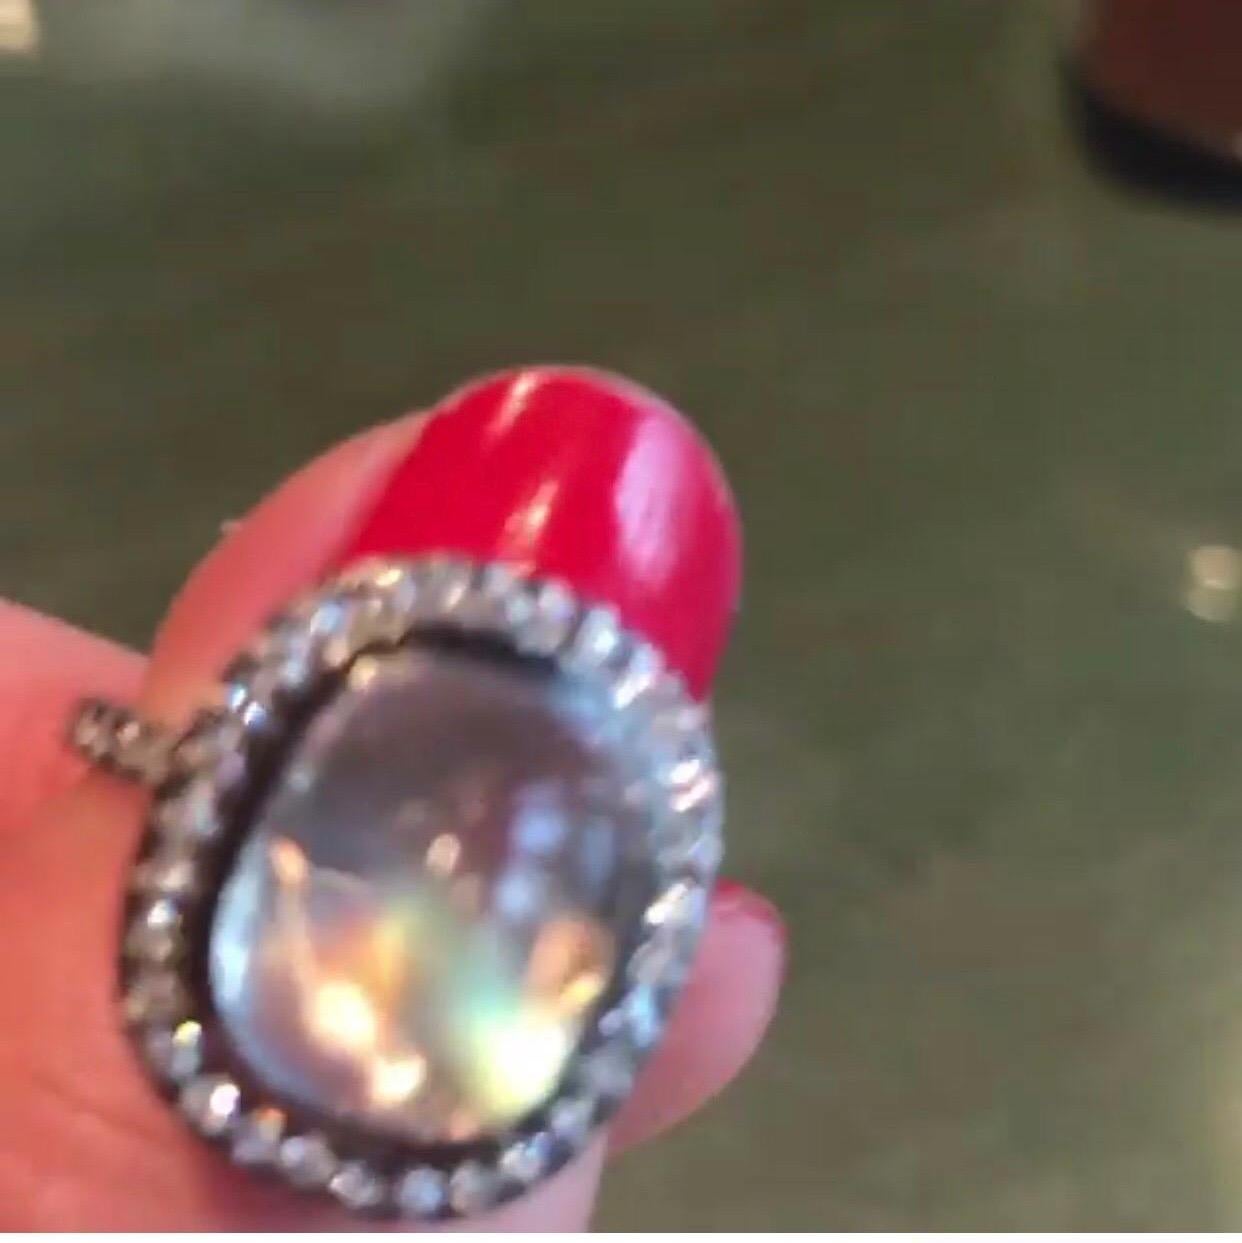 Contemporary Bella Campbell/Campbellian, Statement Rainbow Moonstone Ring with Diamond Accent